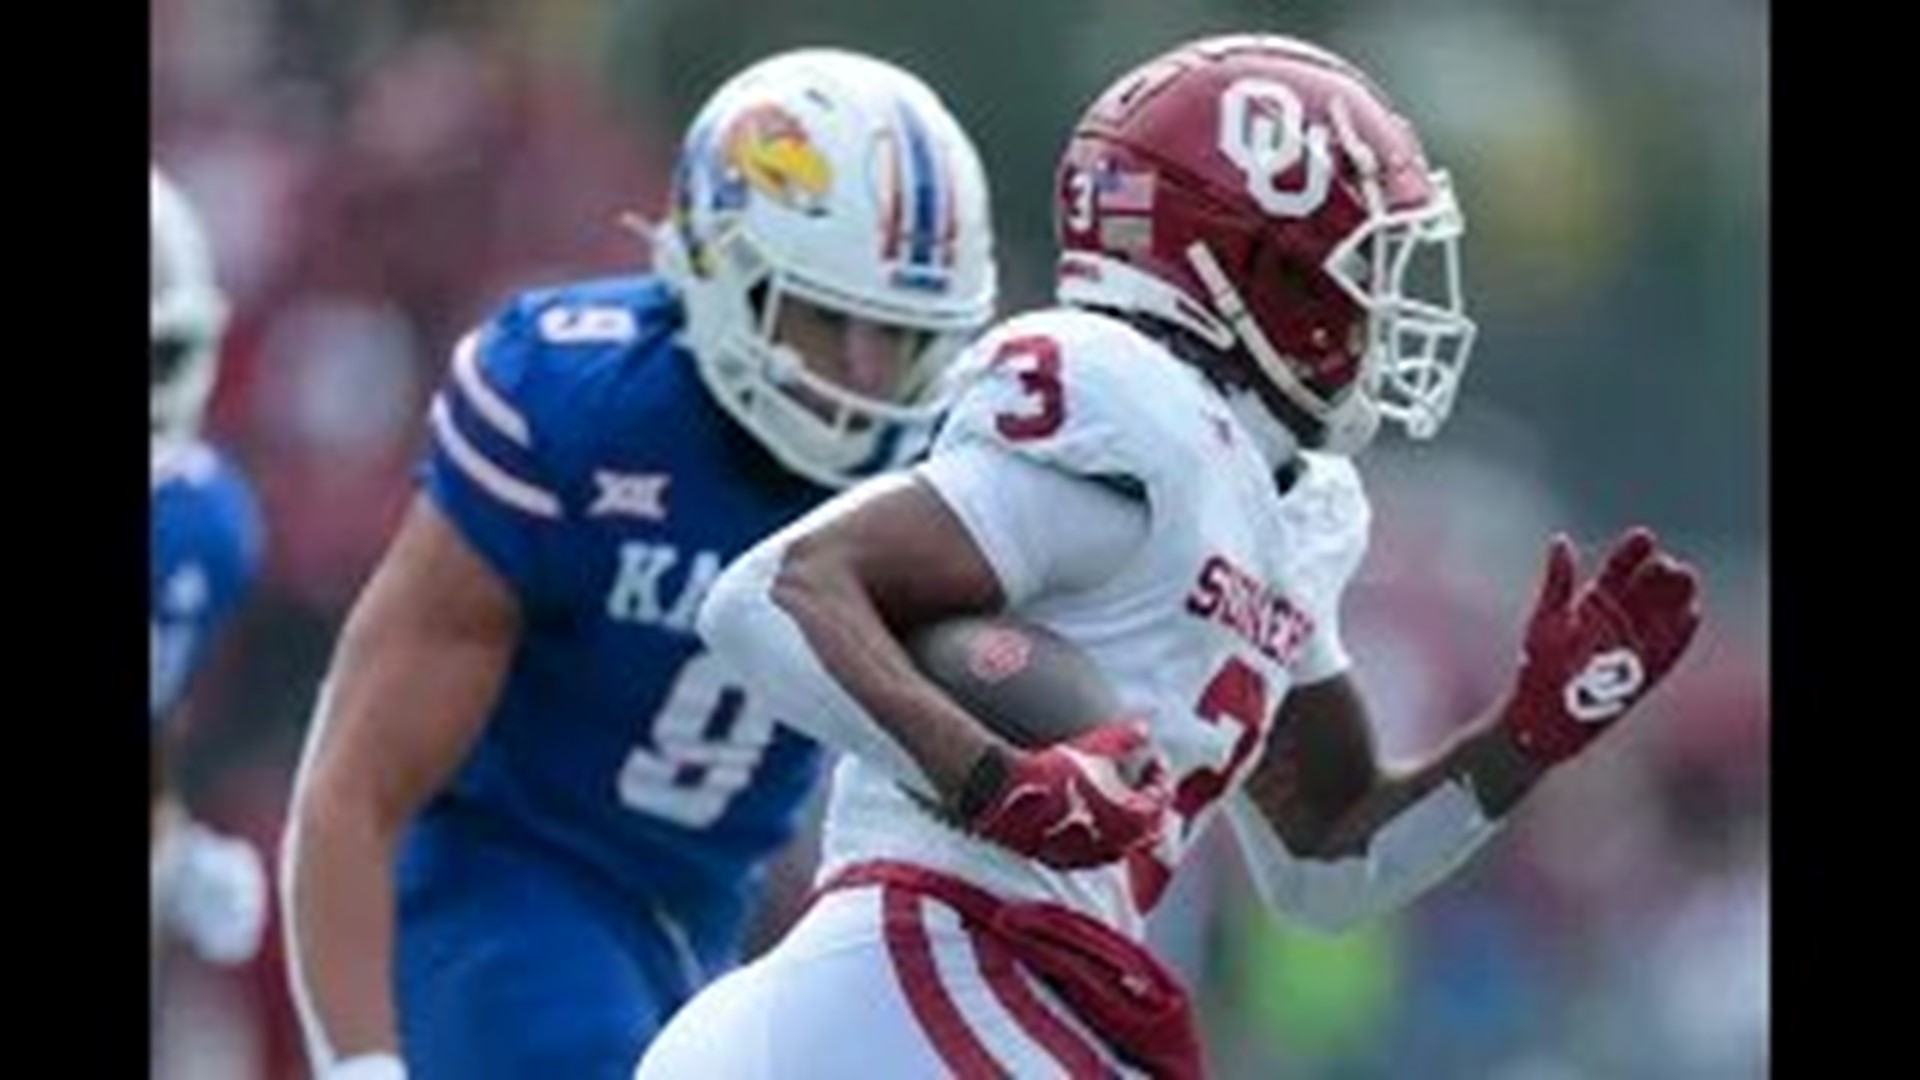 Jalil Farooq will be out until fall camp with an injured foot. Which Oklahoma Sooners will step at wide receiver over the rest of the spring?